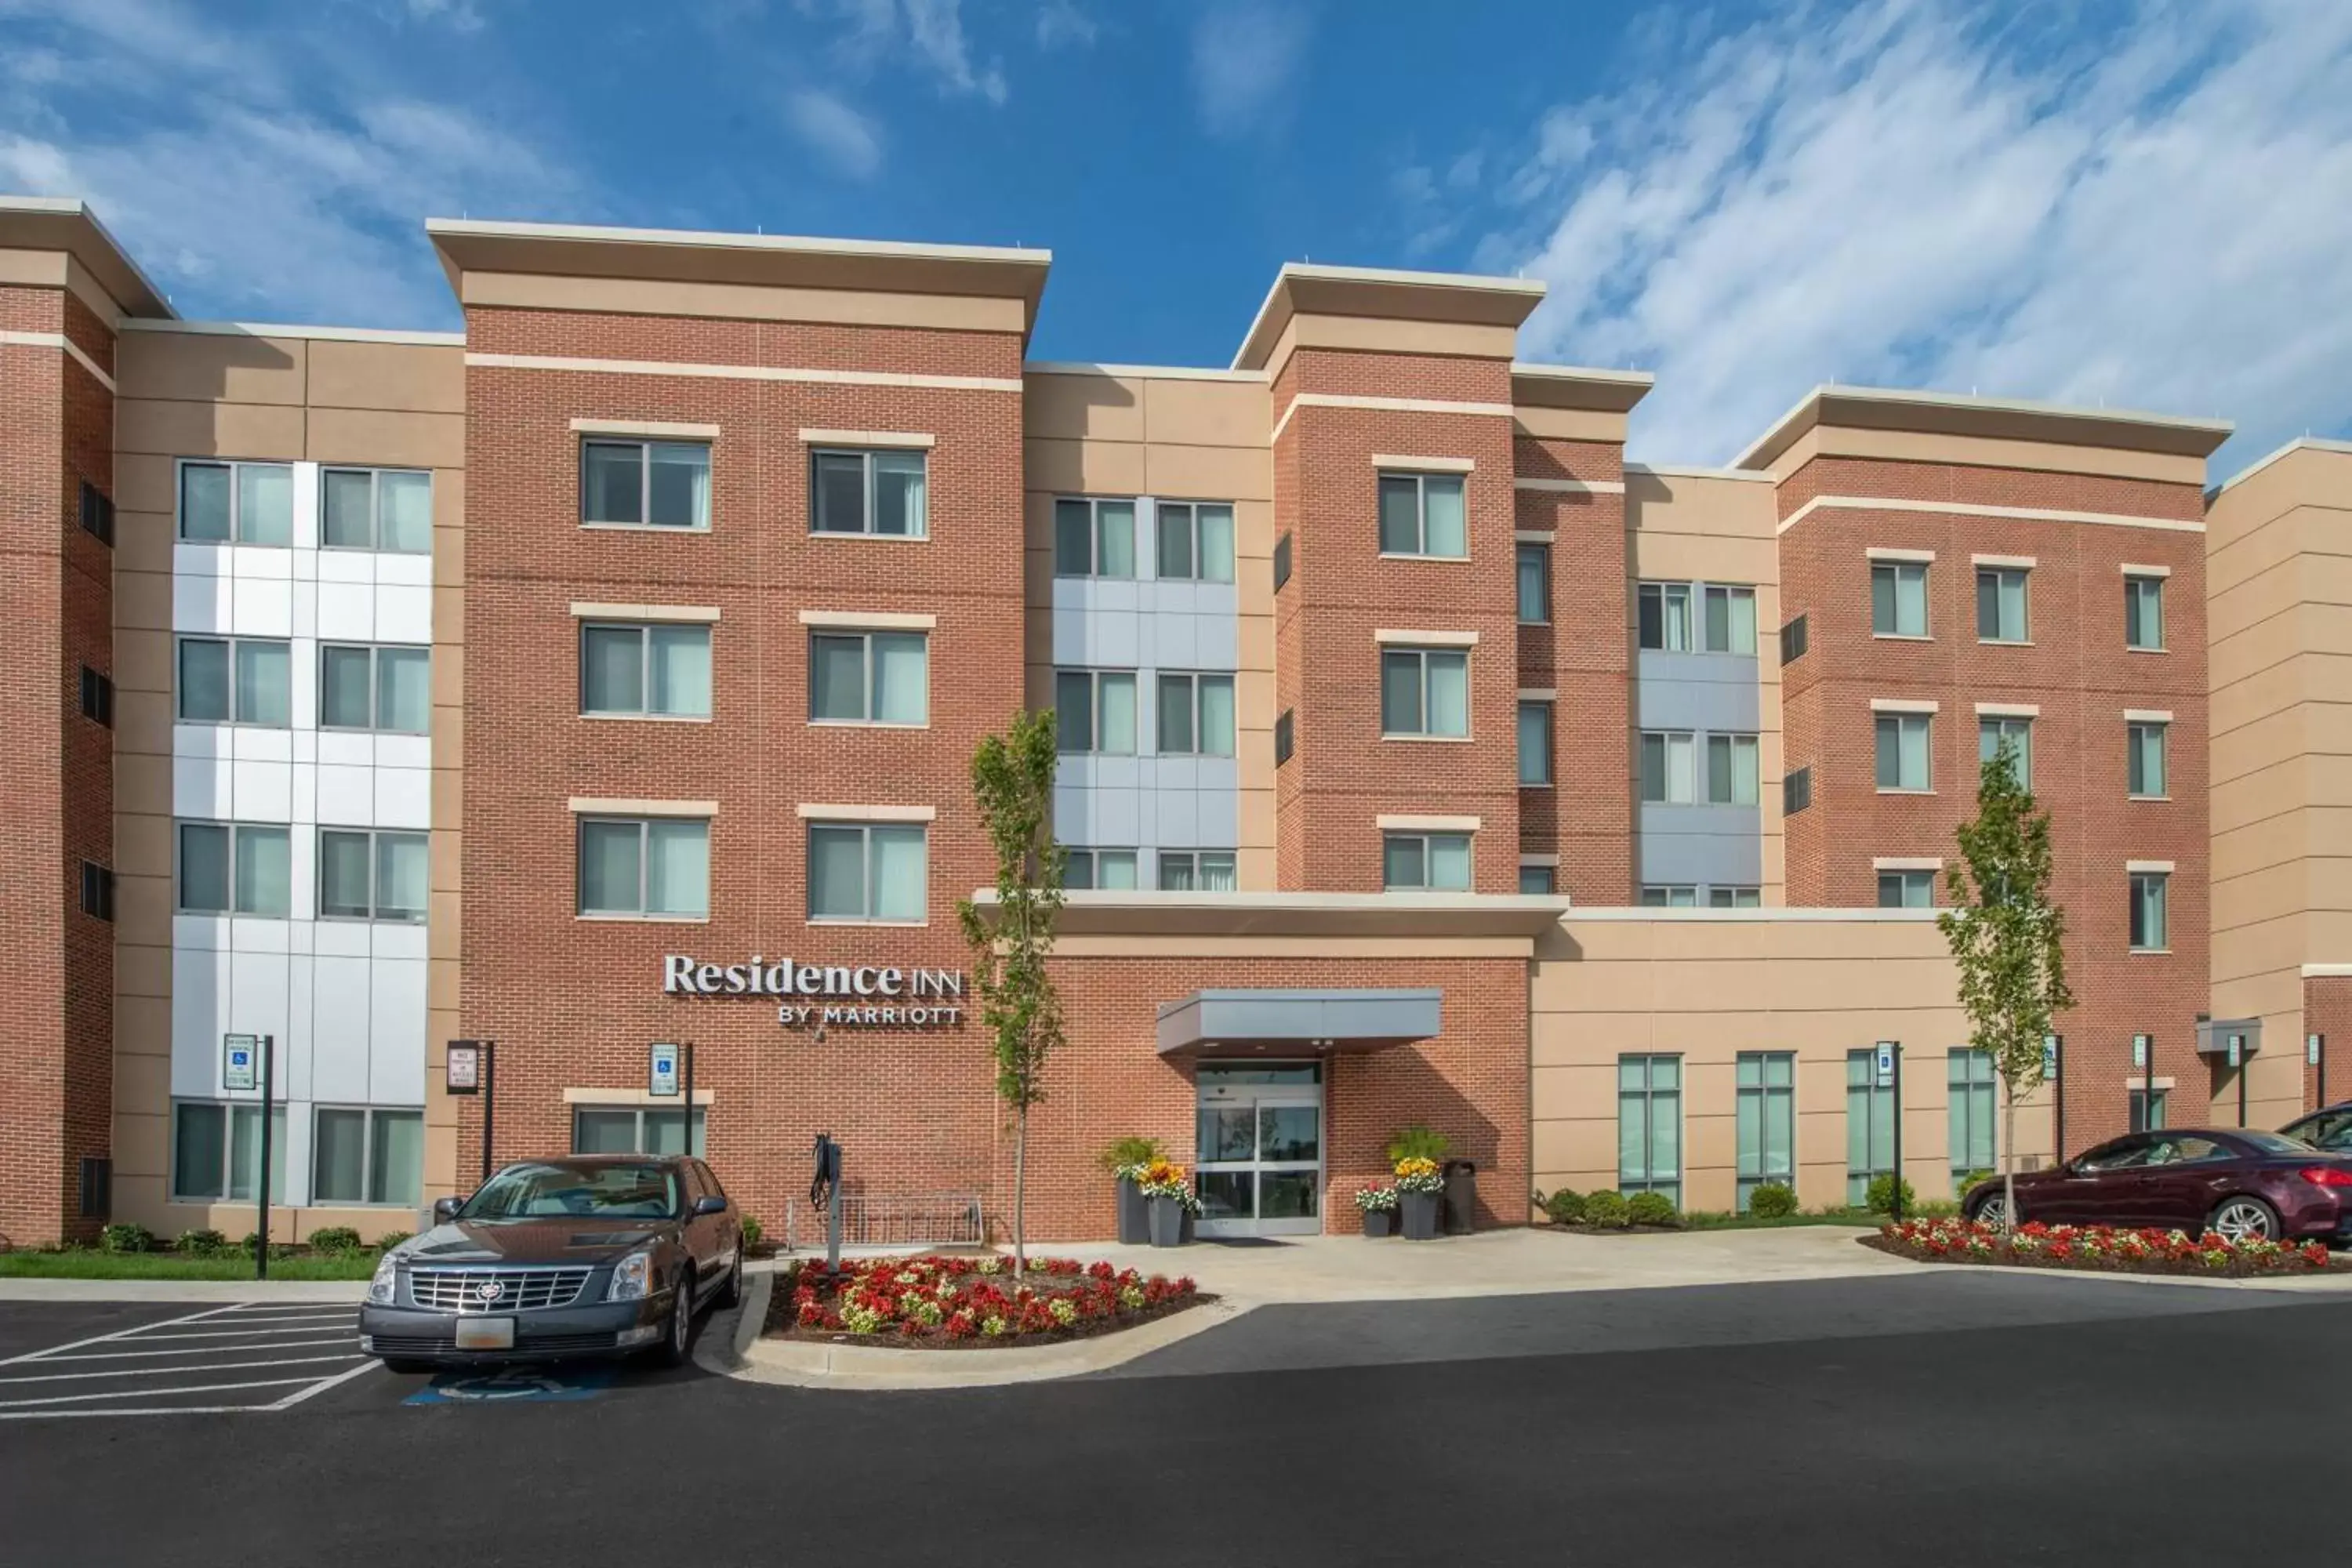 Property Building in Residence Inn Fulton at Maple Lawn